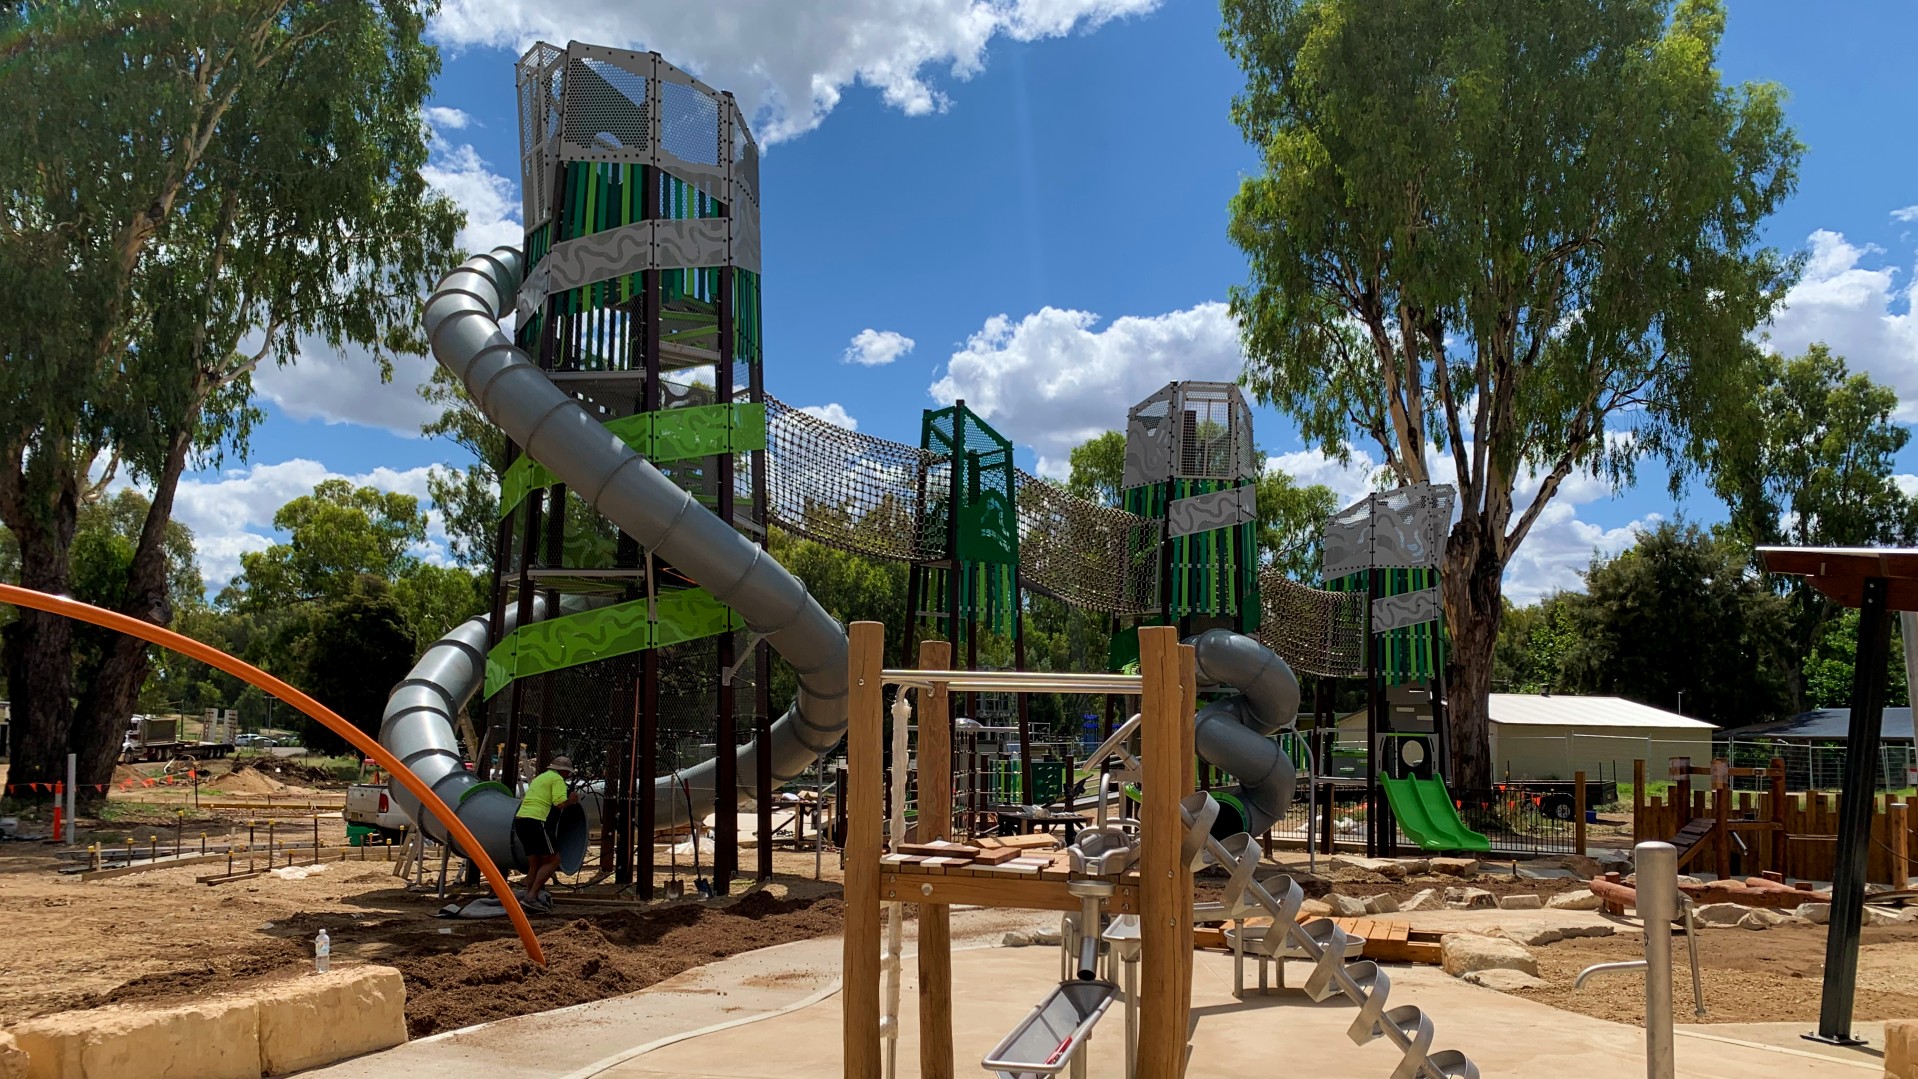 Wagga's 'regionally significant' Riverside playground nearing completion